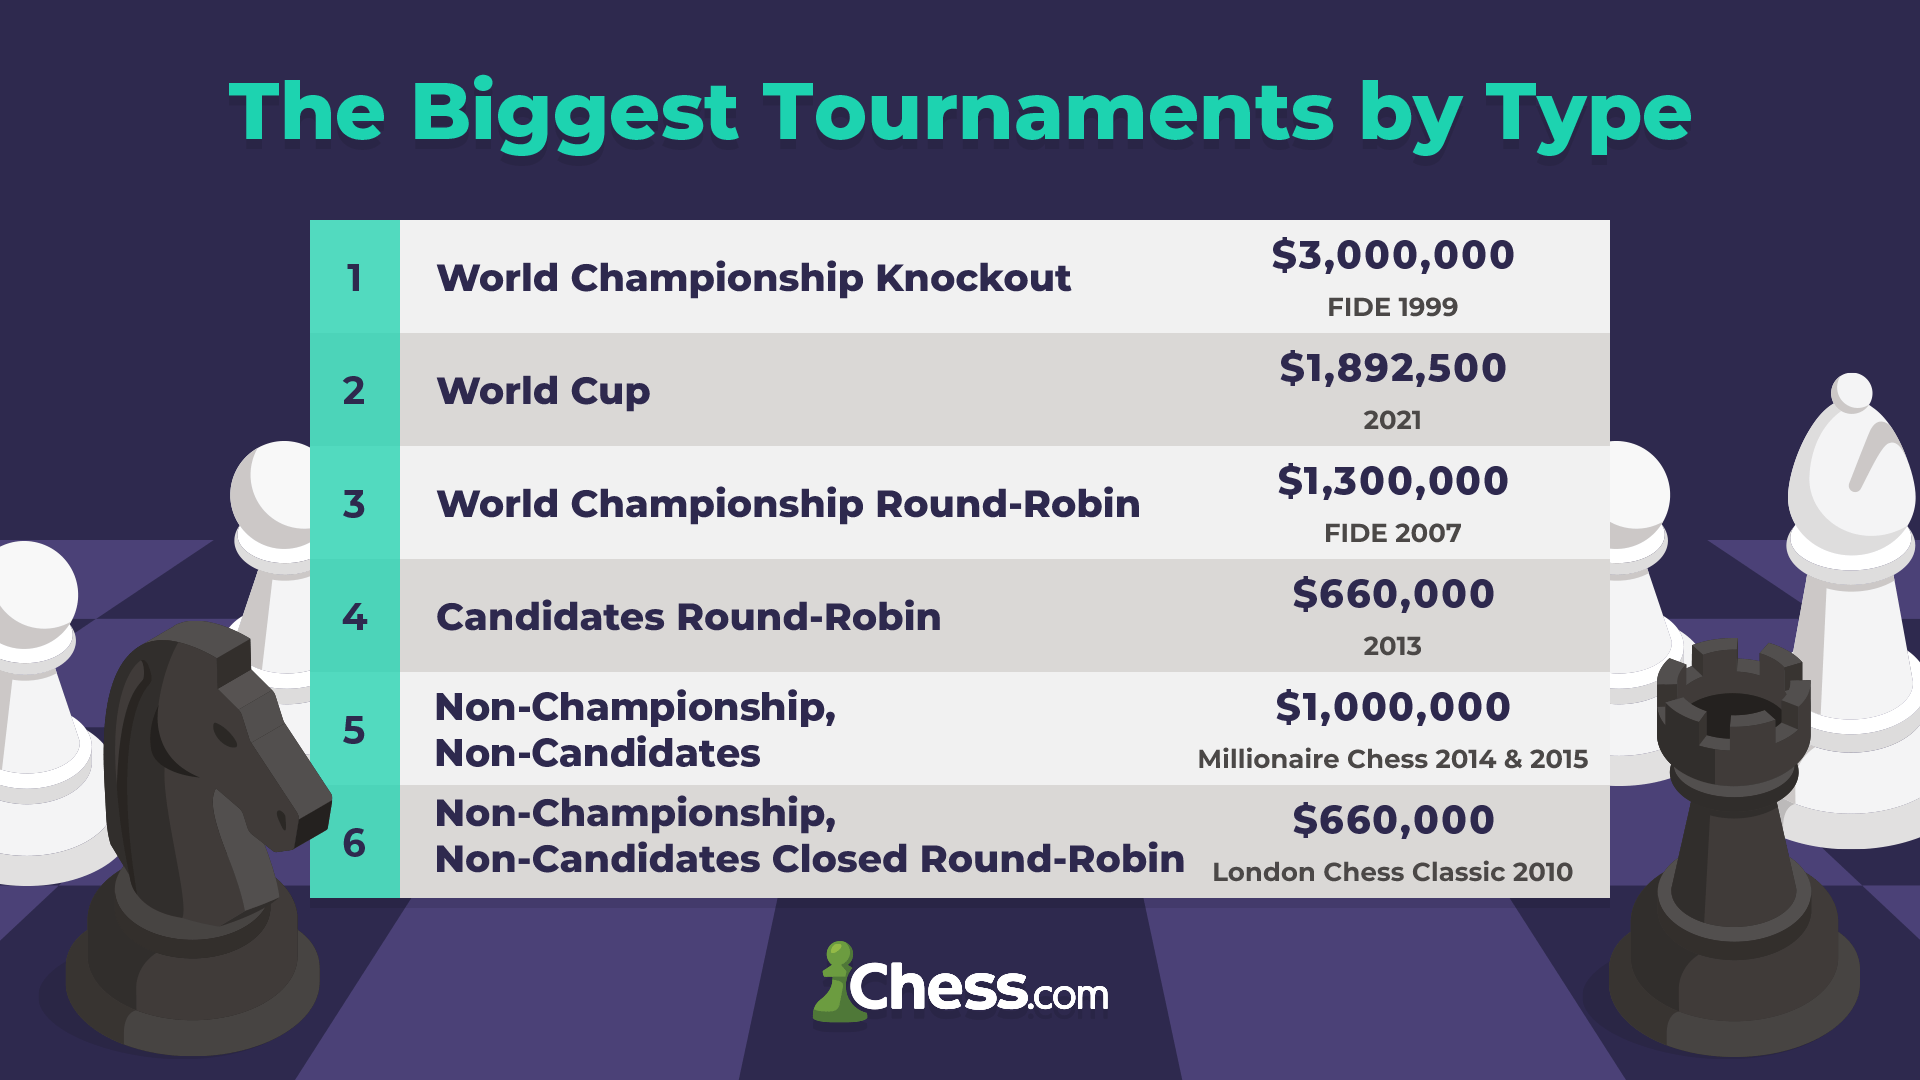 Who Is The Biggest Prizewinner In Chess History?